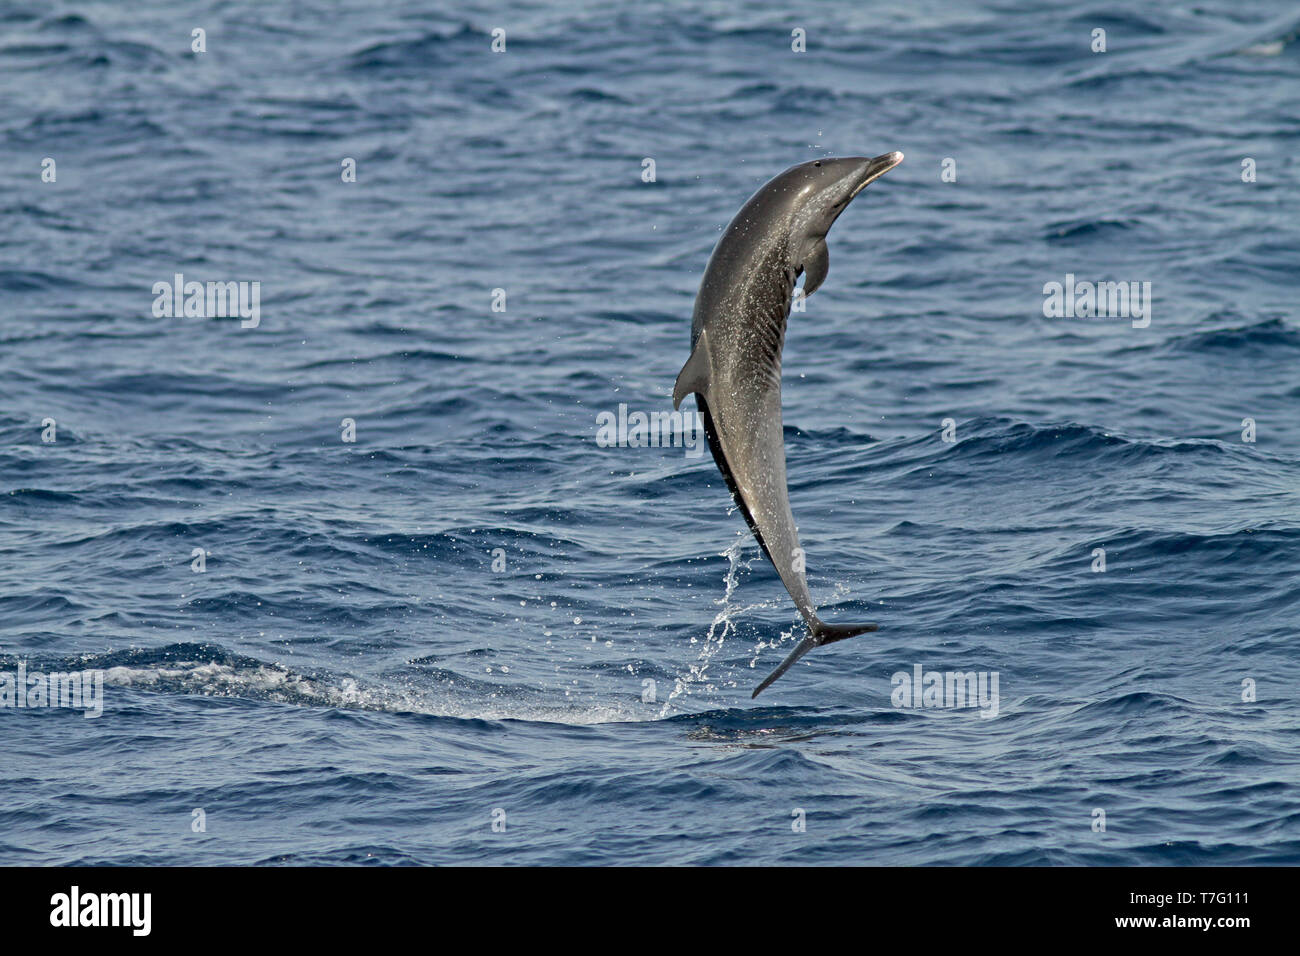 Pantropical spotted dolphin (Stenella attenuata) jumping out of the water Stock Photo